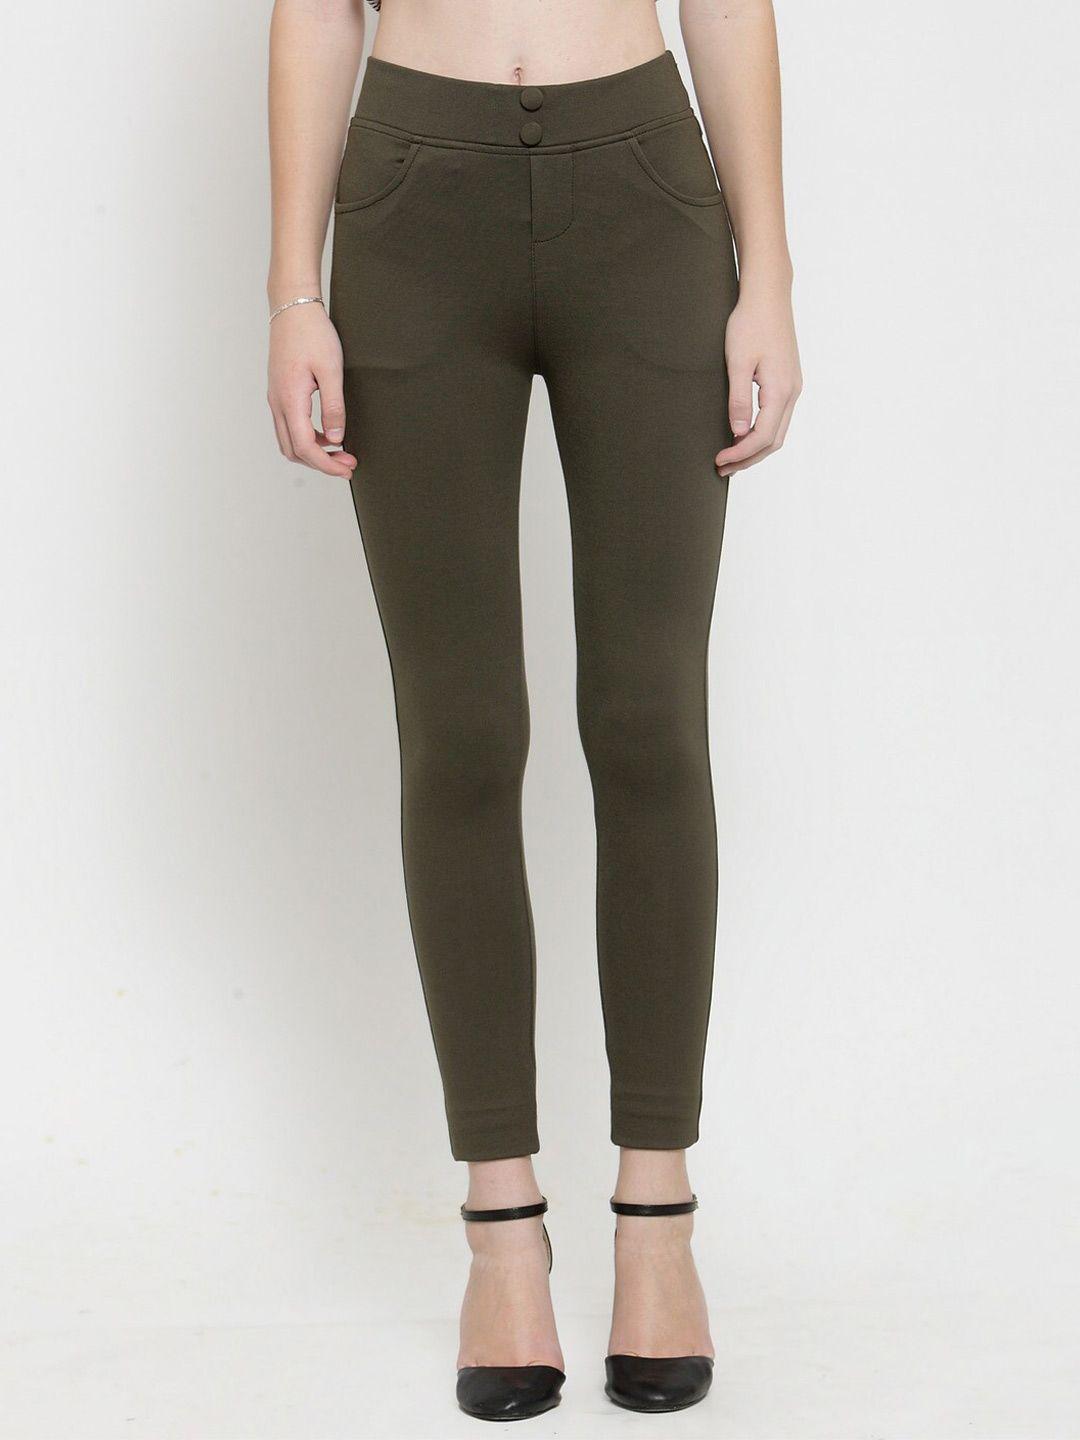 clora-creation-women-olive-green-solid-jeggings